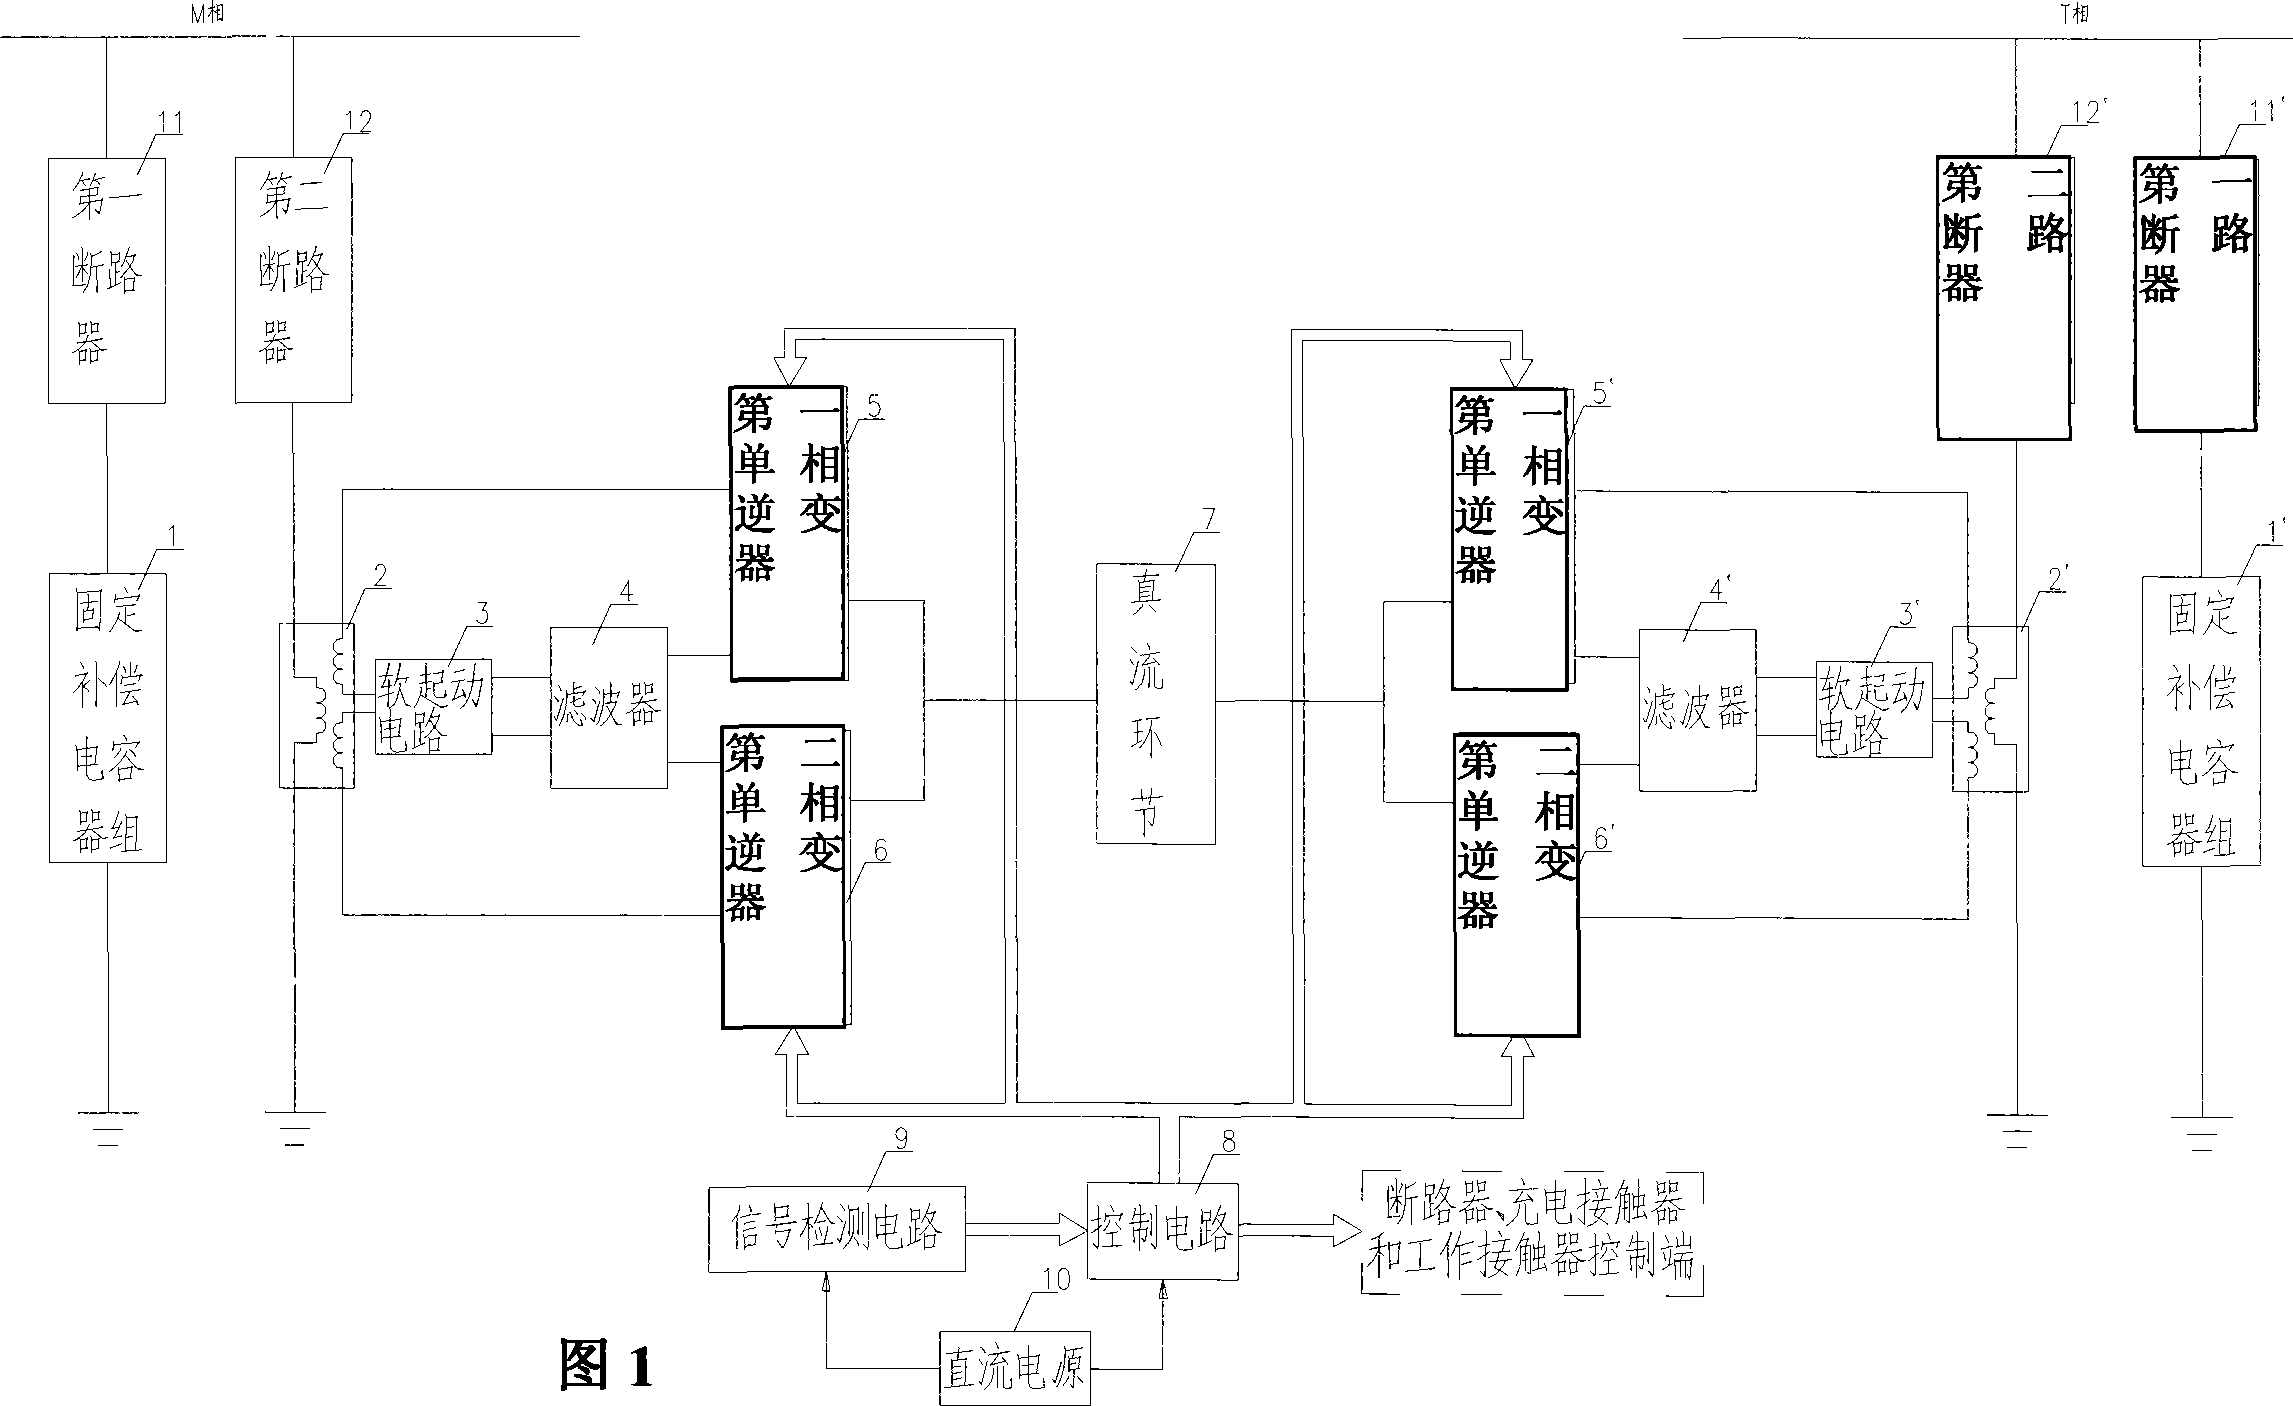 Mixed static synchronous reactive compensator